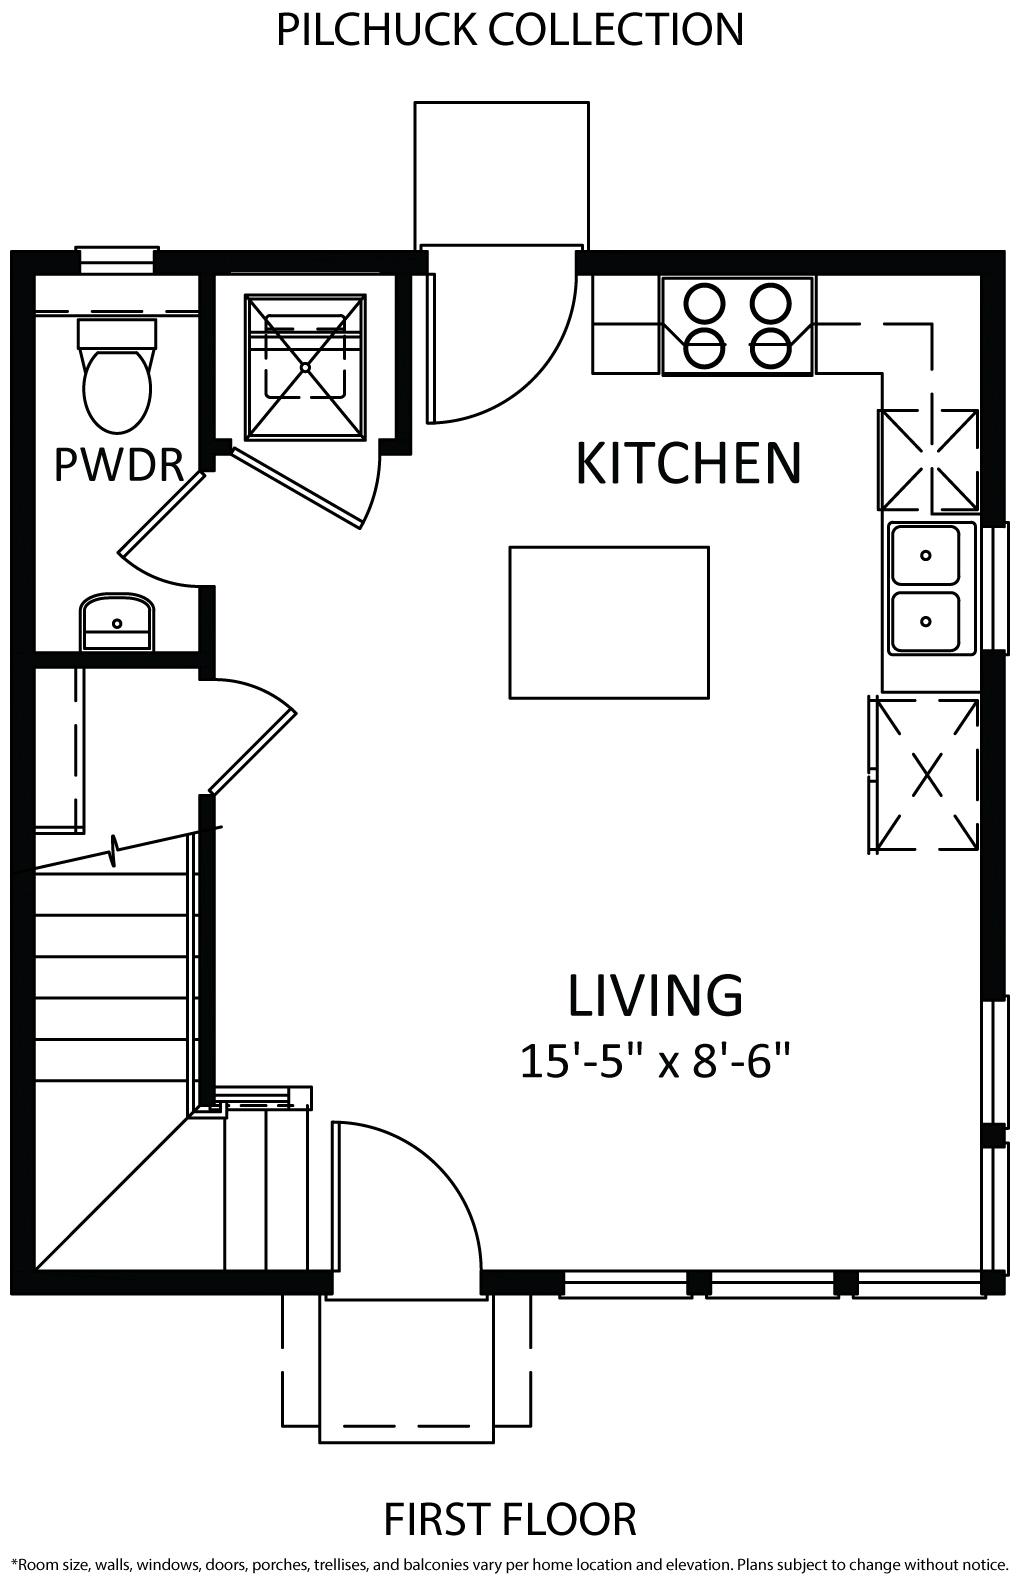 Floorplan 01. TJH_7546_26th_Ave_NW_C_Pilchuck_1.jpg for 7544 26th Avenue NW